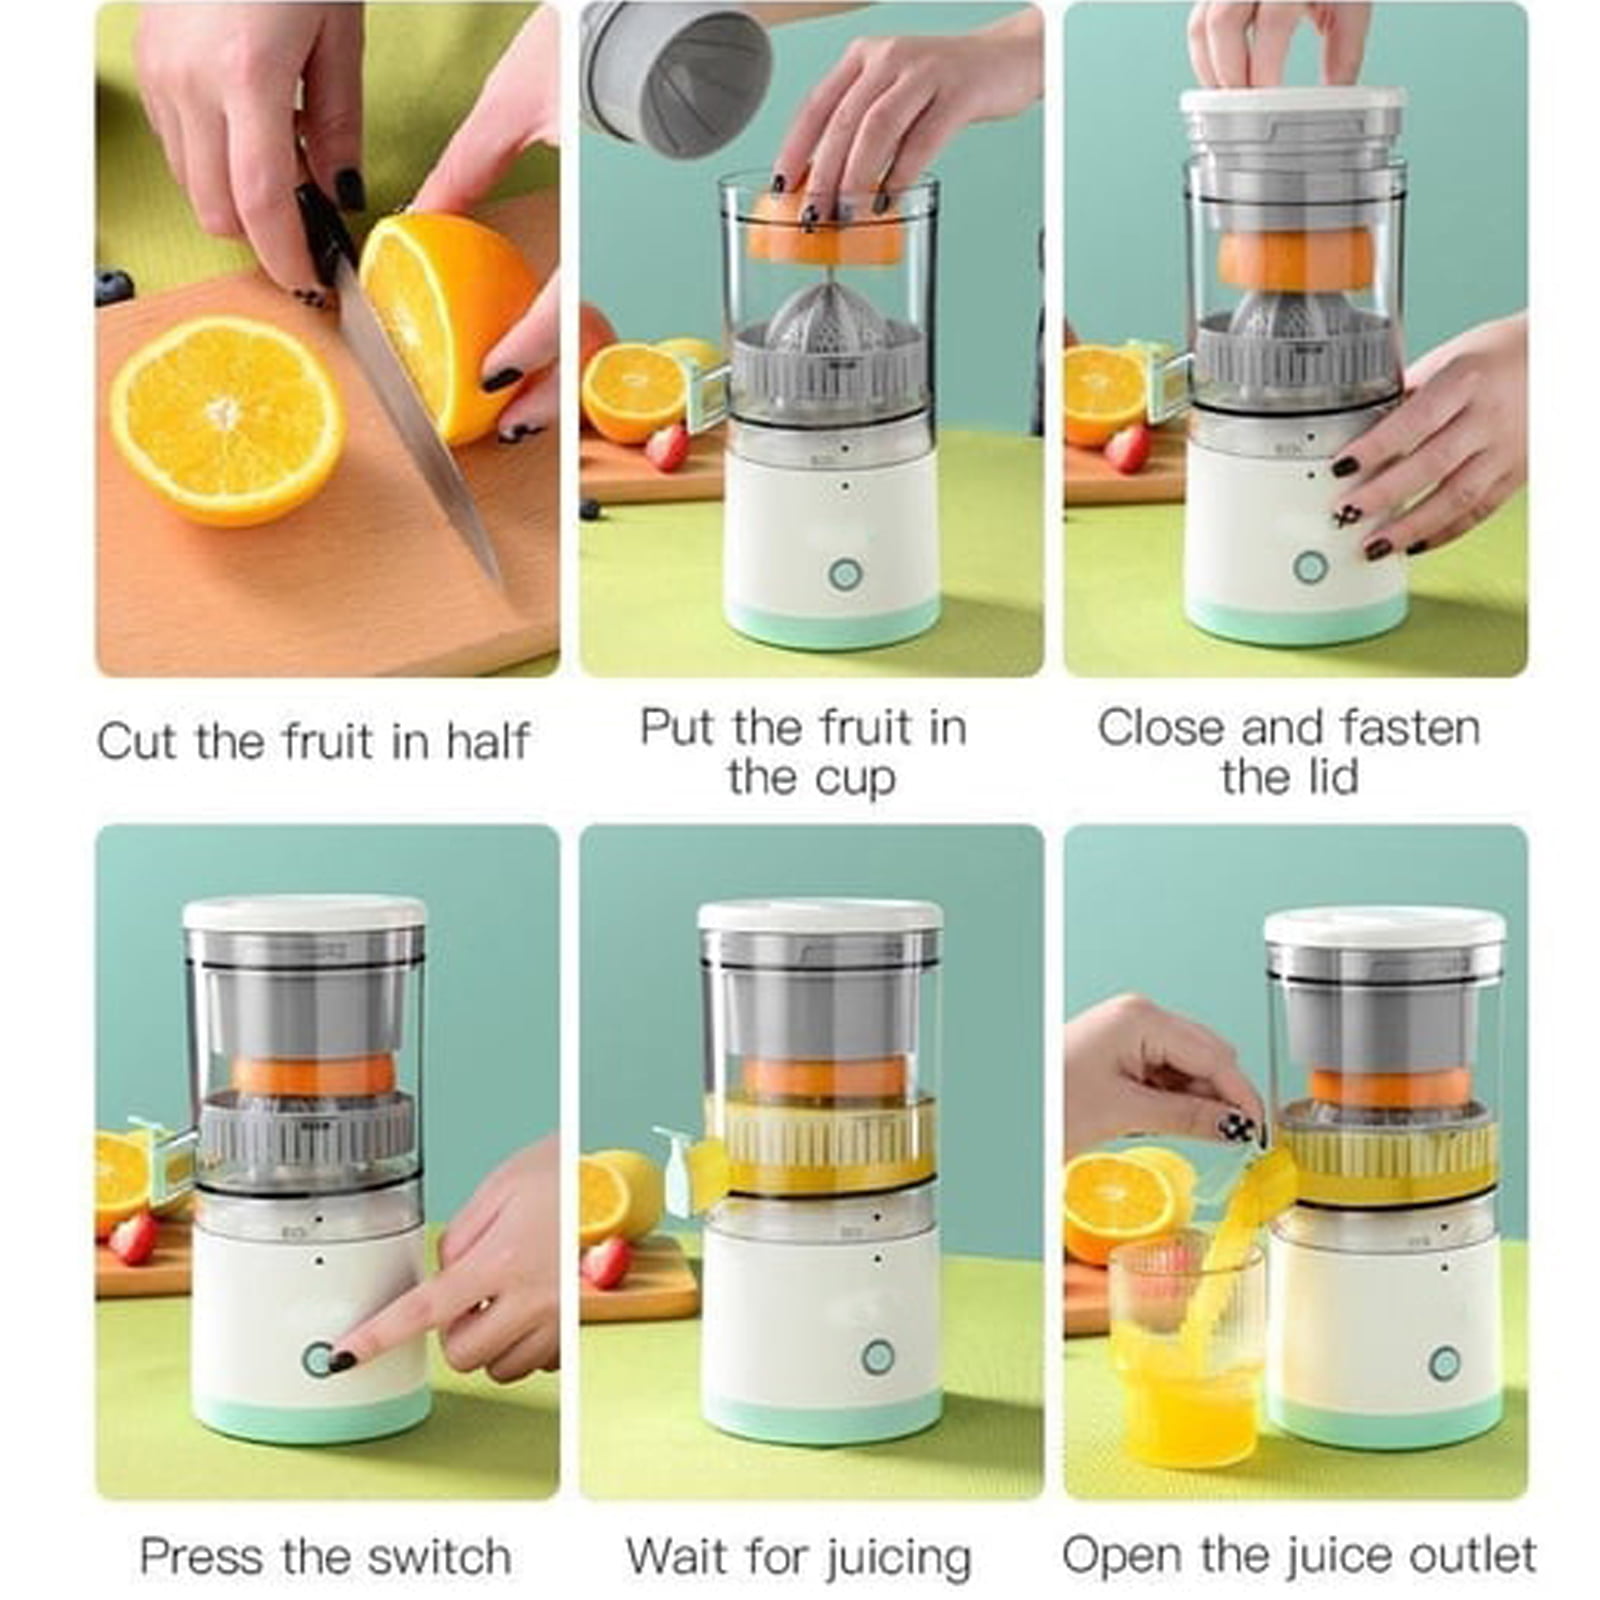  HOT DEAL Citrus Juicer Electric Bundle with Shaved Ice